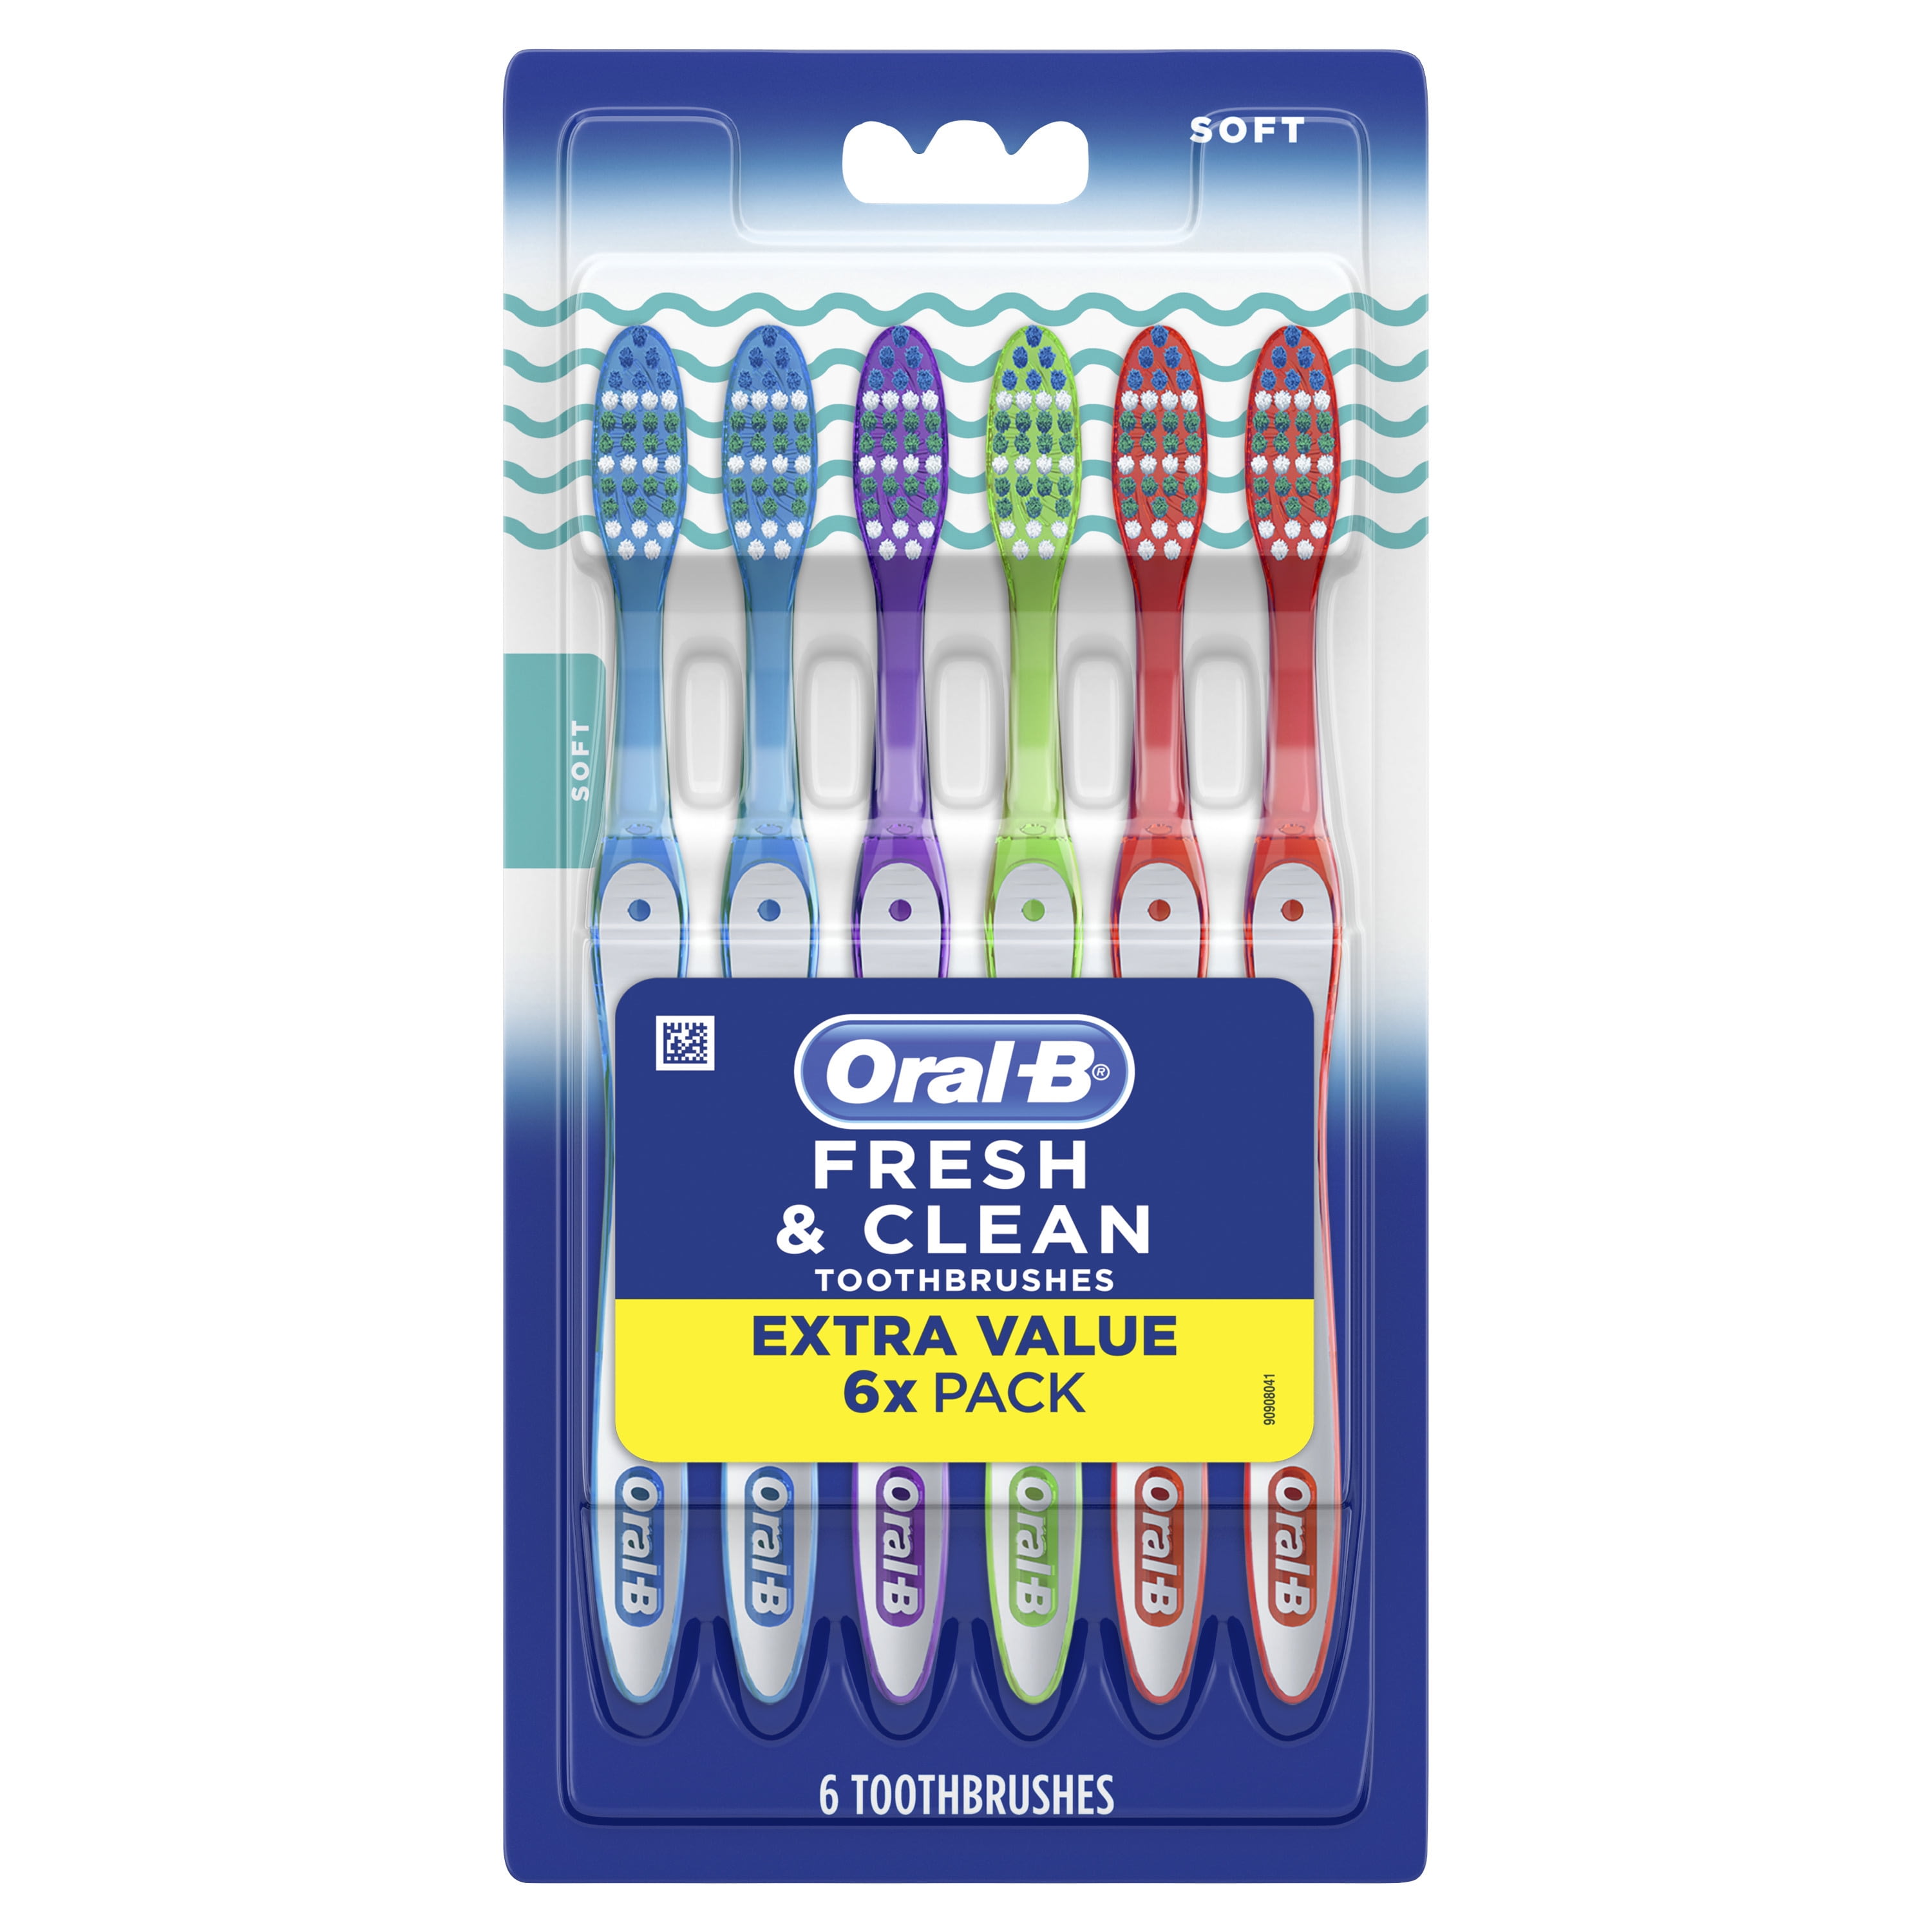 Oral-B Fresh & Clean Toothbrushes, Soft, 6 Count - DroneUp Delivery